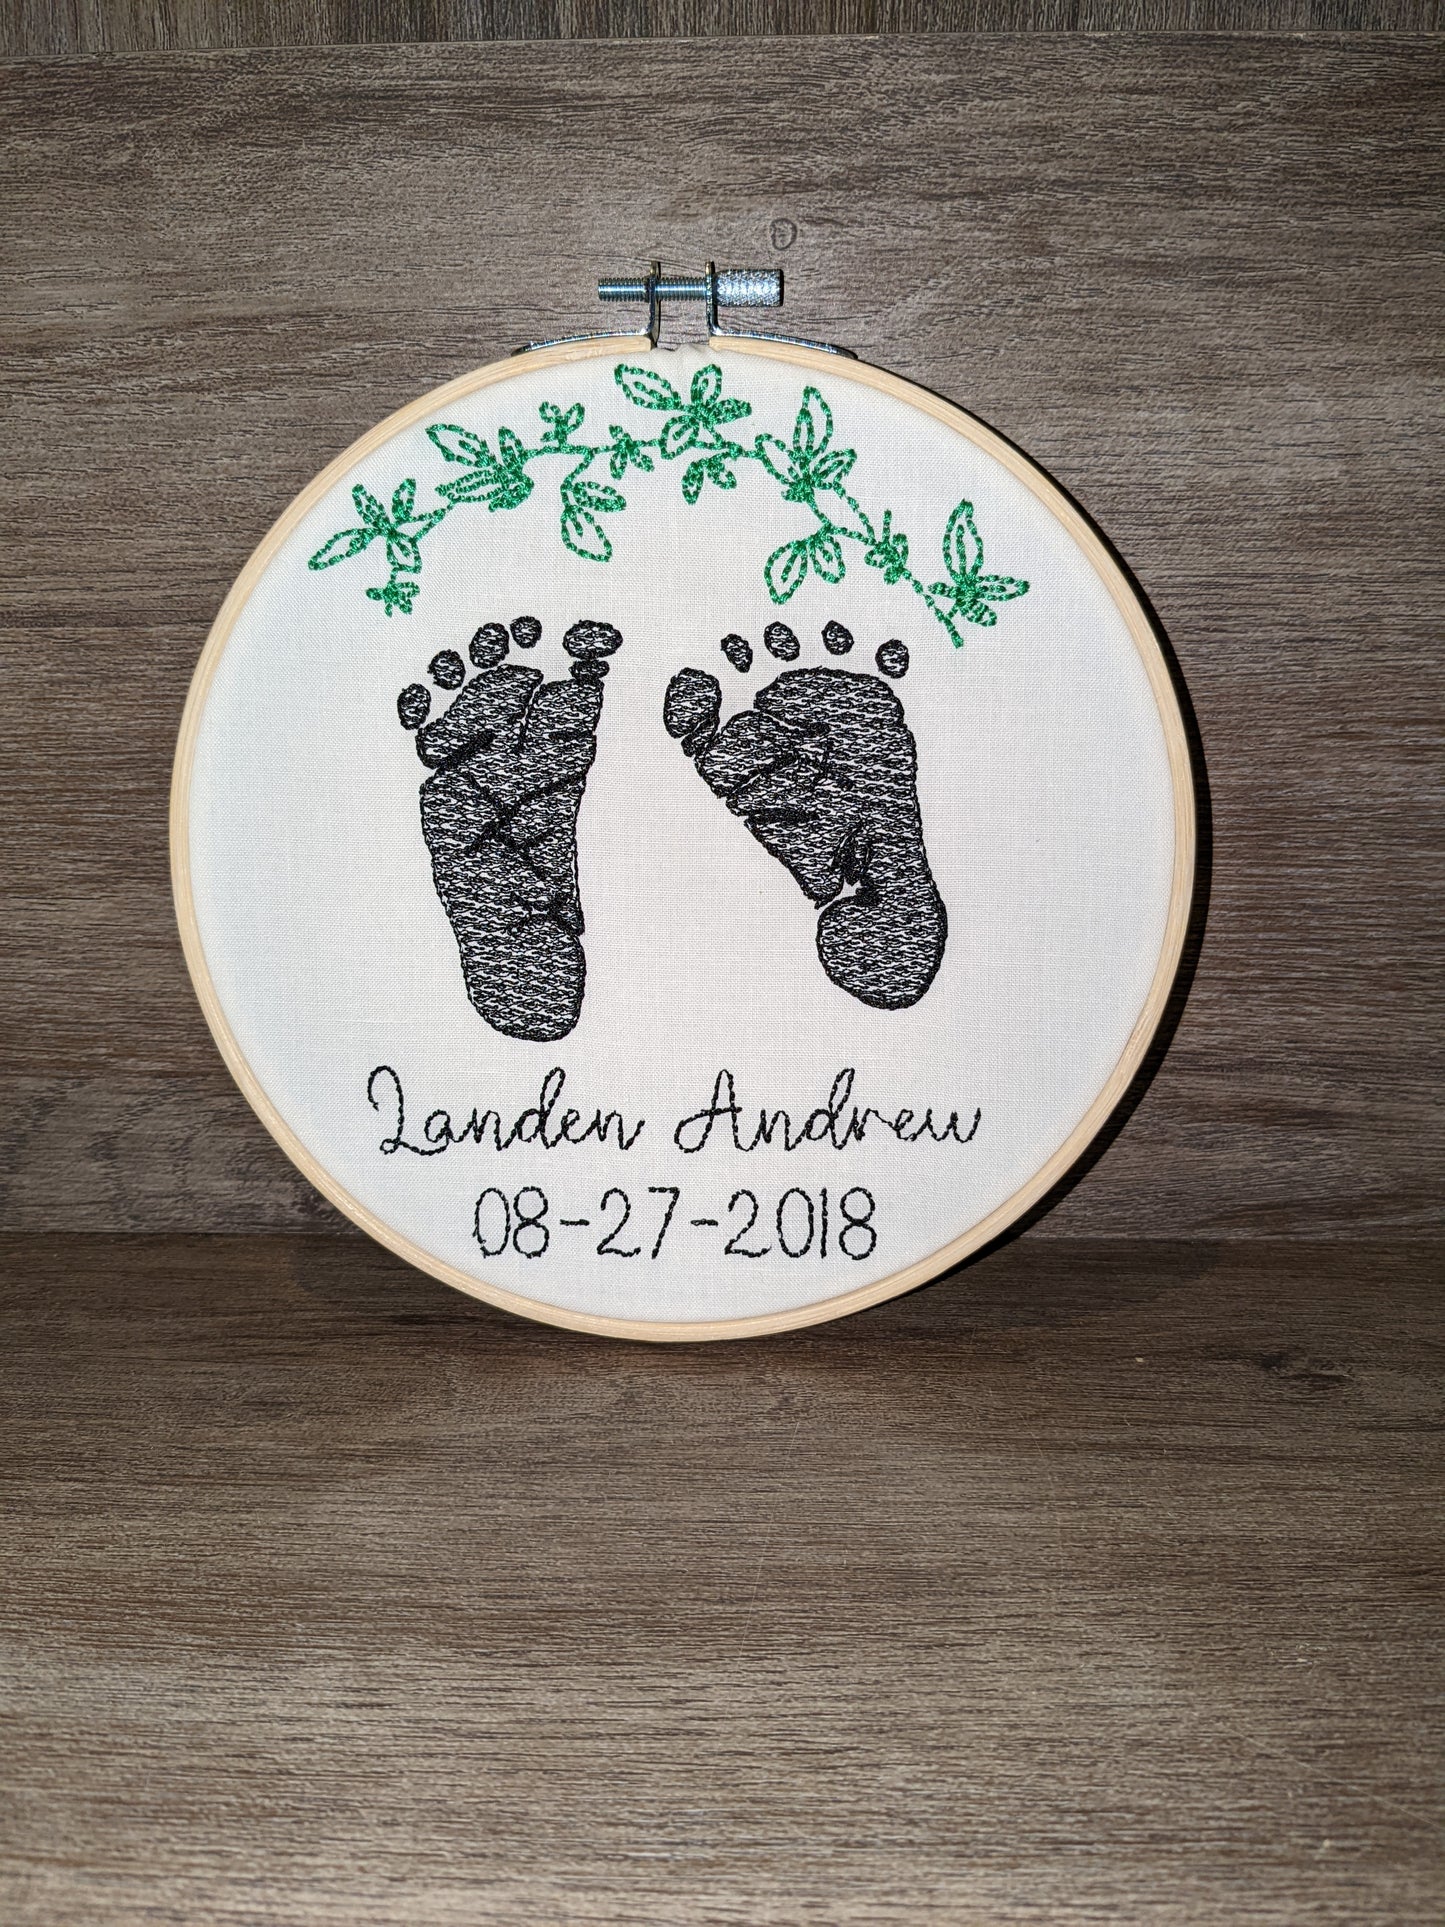 Embroidered baby feet with leaf design